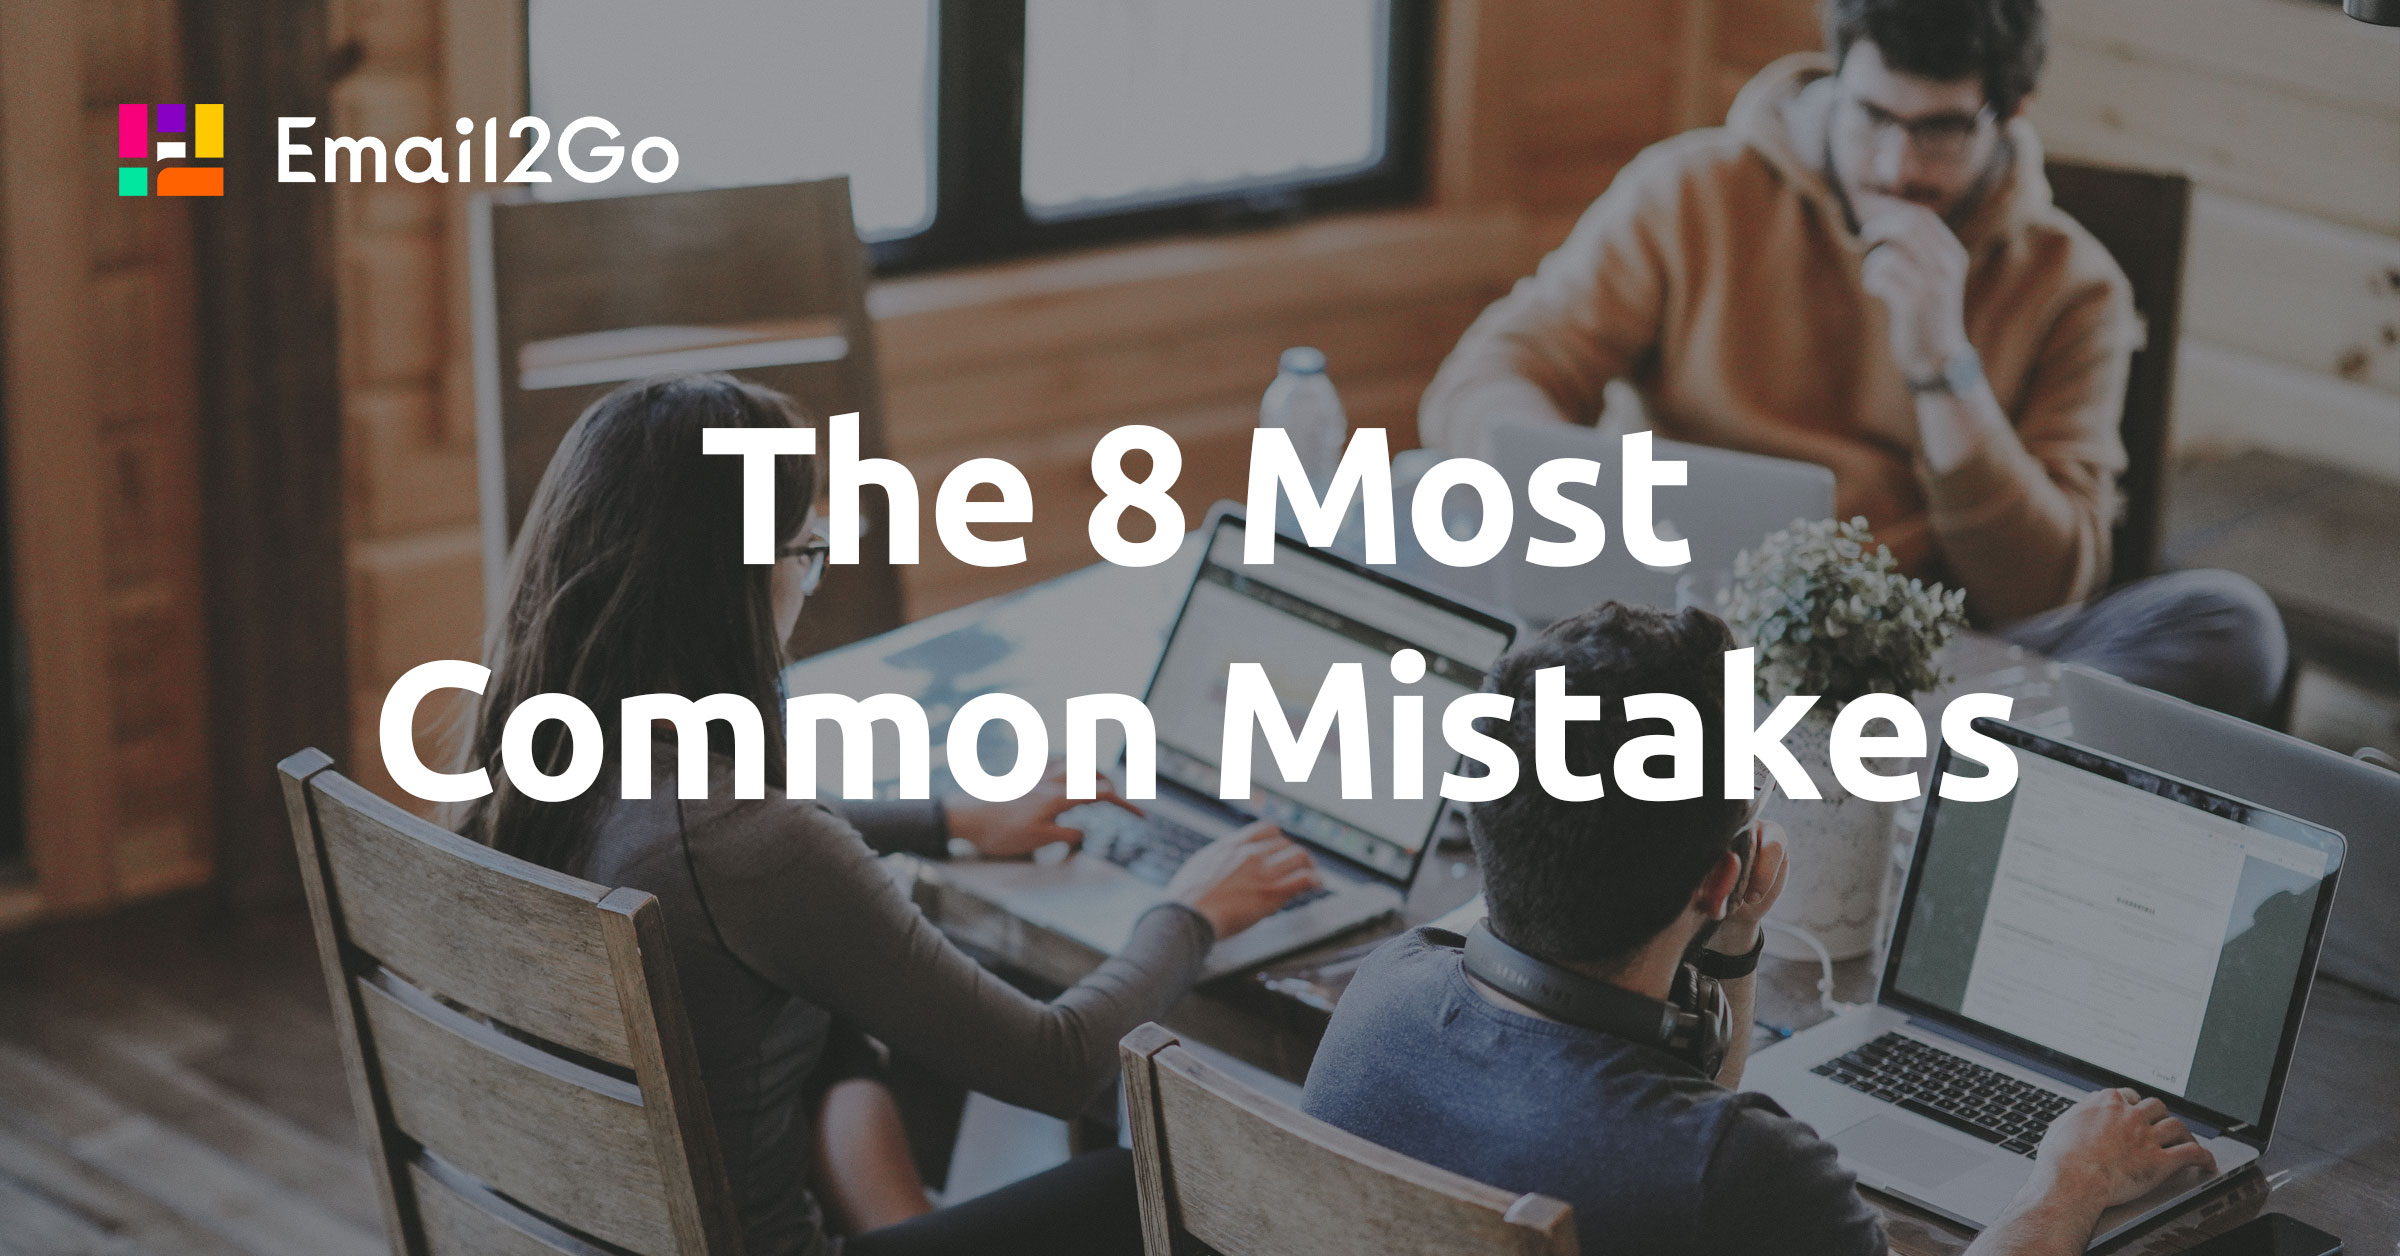 The 8 Most Common Mistakes